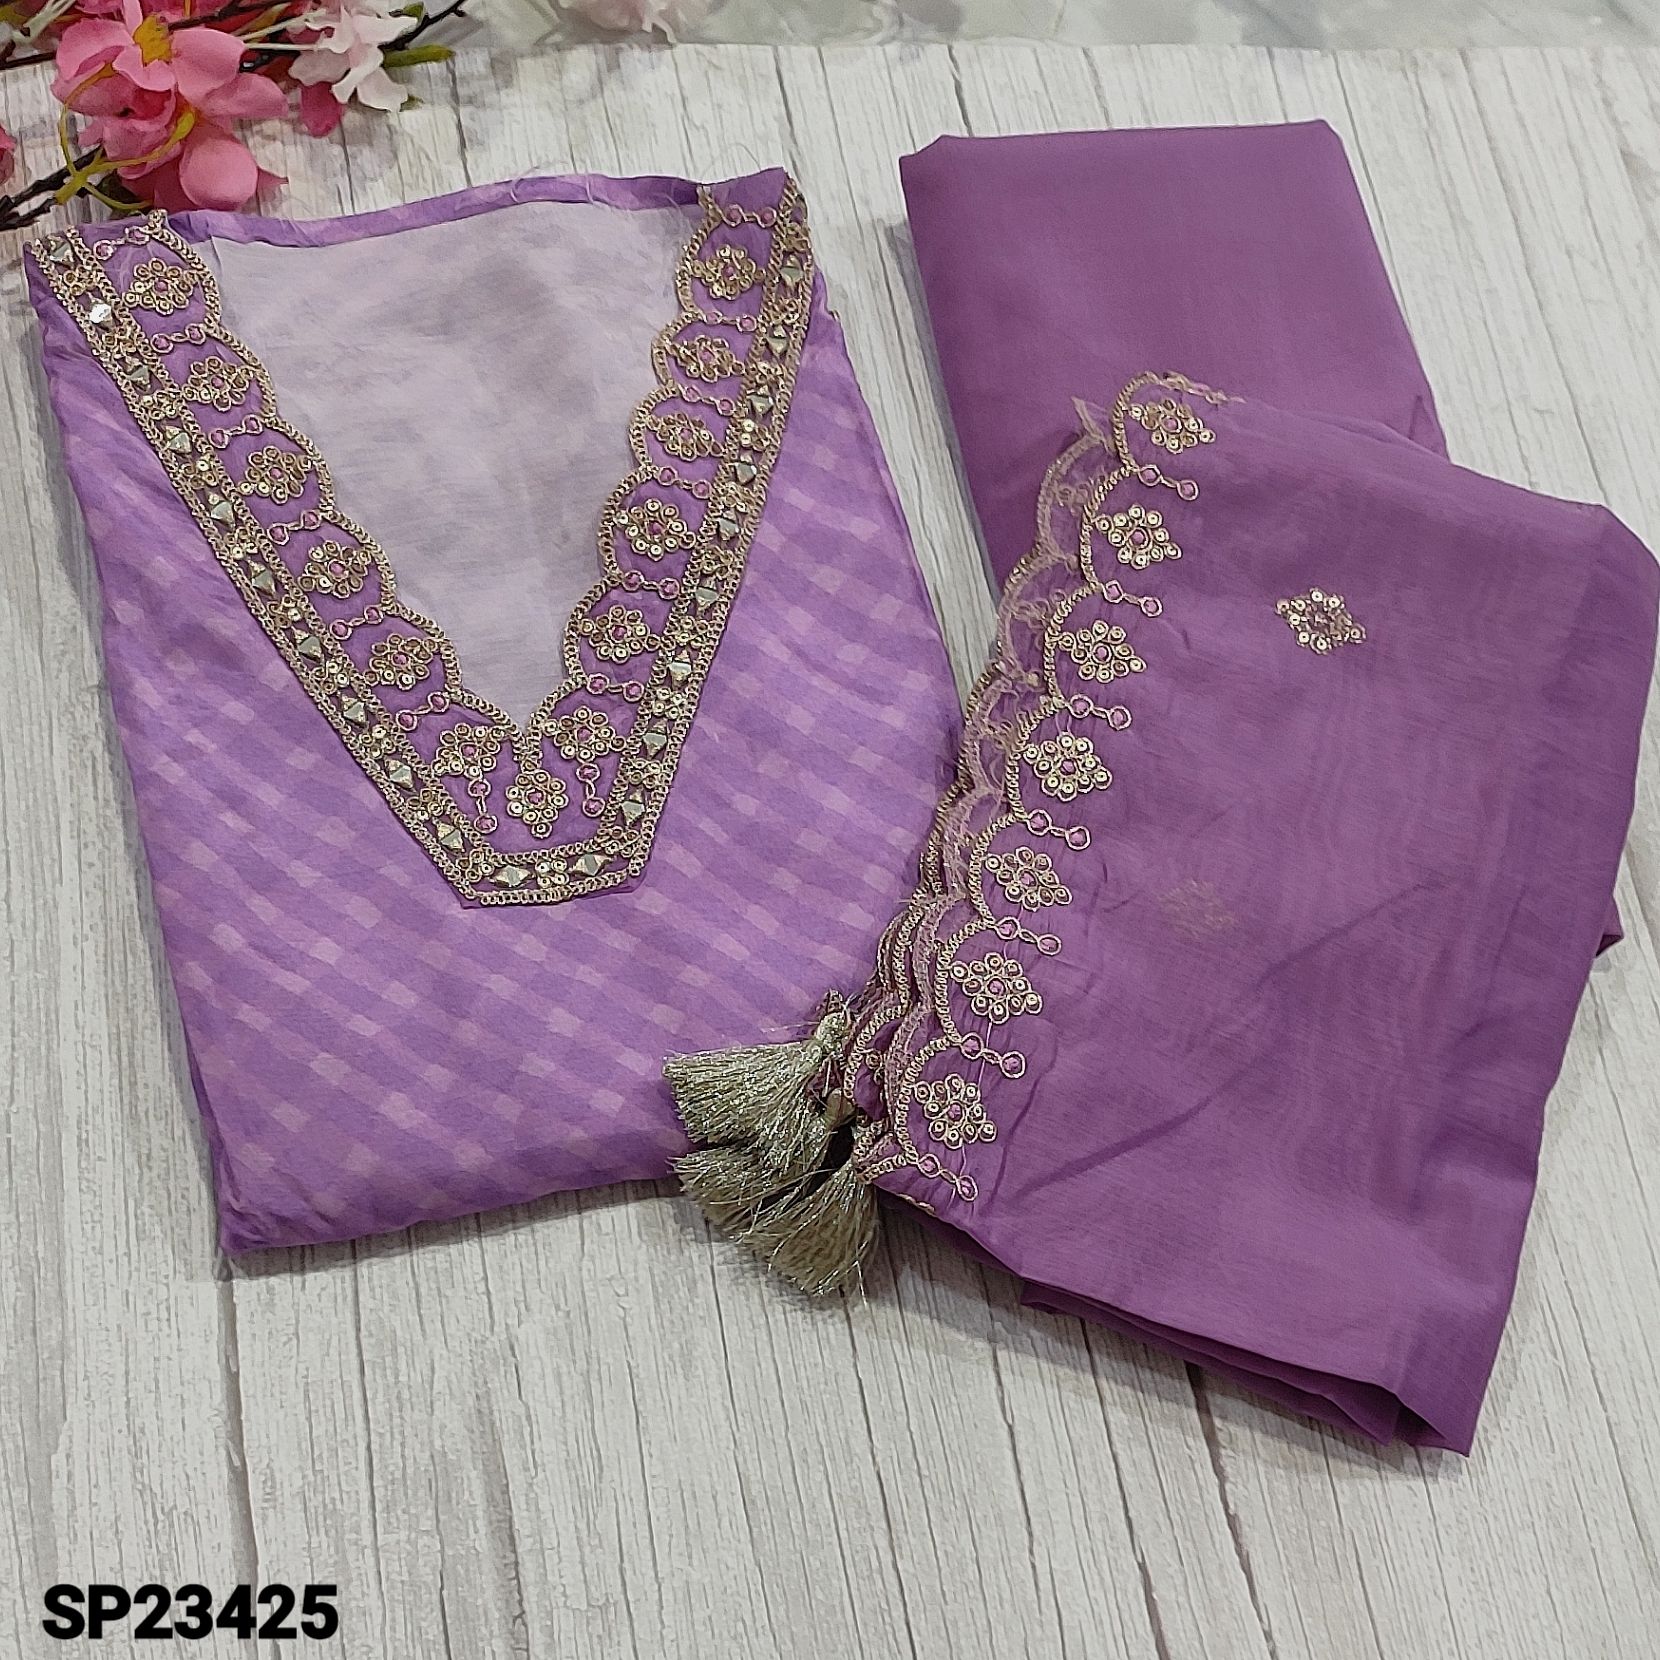 CODE SP23425 : Designer Light Purple Shade Pure Masleen Silk Unstitched  salwar material (silky, thin fabric, lining needed) V-Neck highlighted with  zari, sequins and real mirror detailing, abstract printed all over, Matching